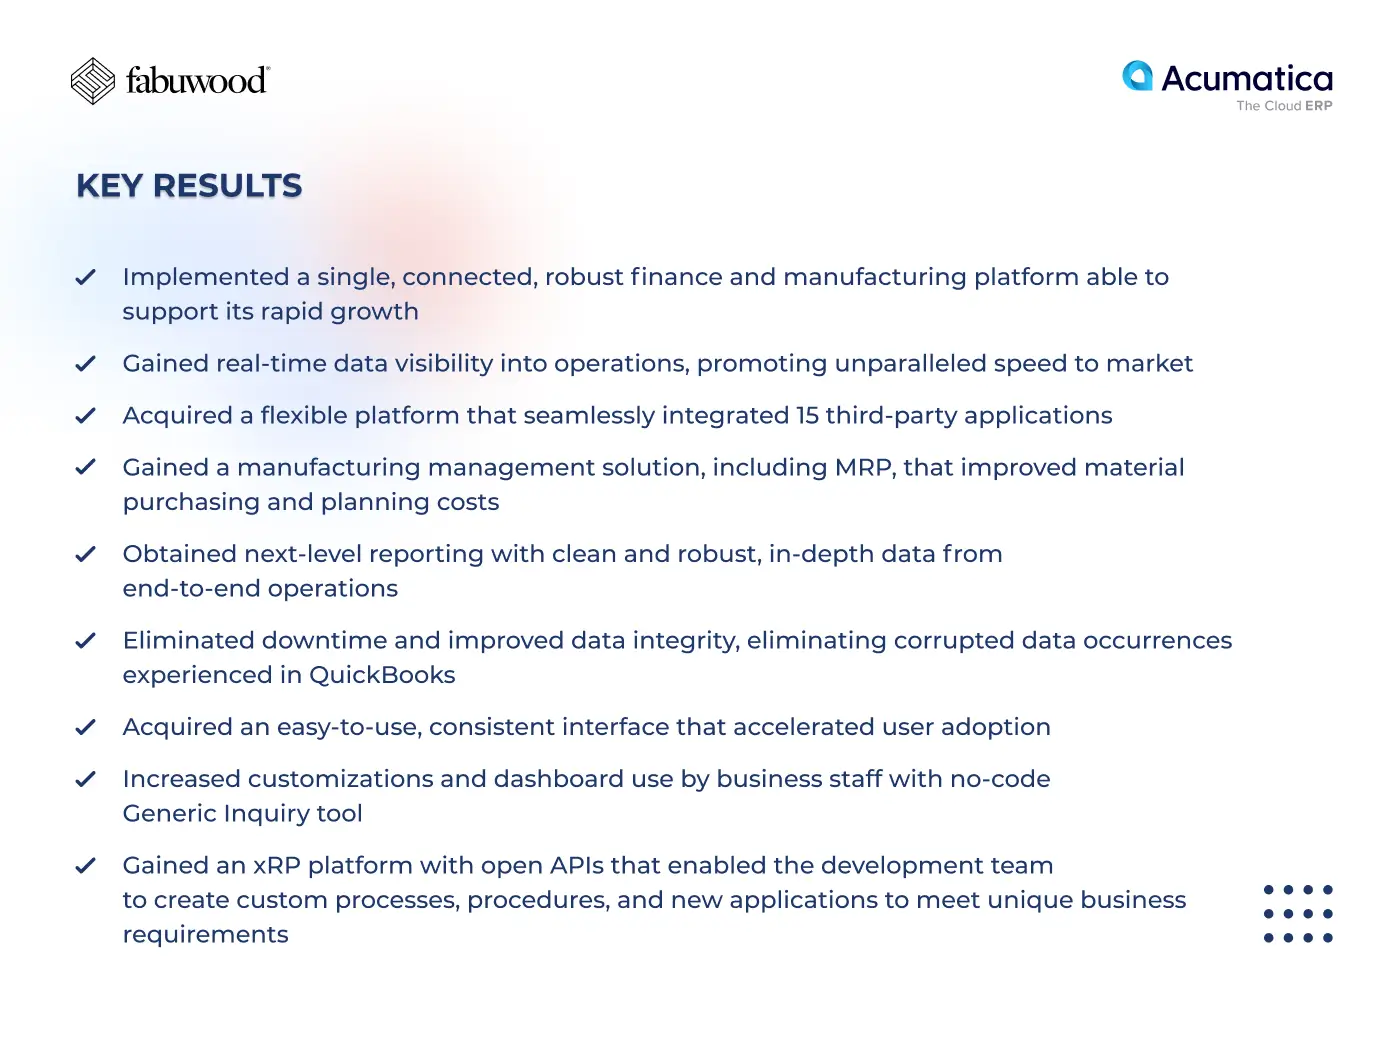 Key results of Fabuwood with Acumatica Cloud ERP